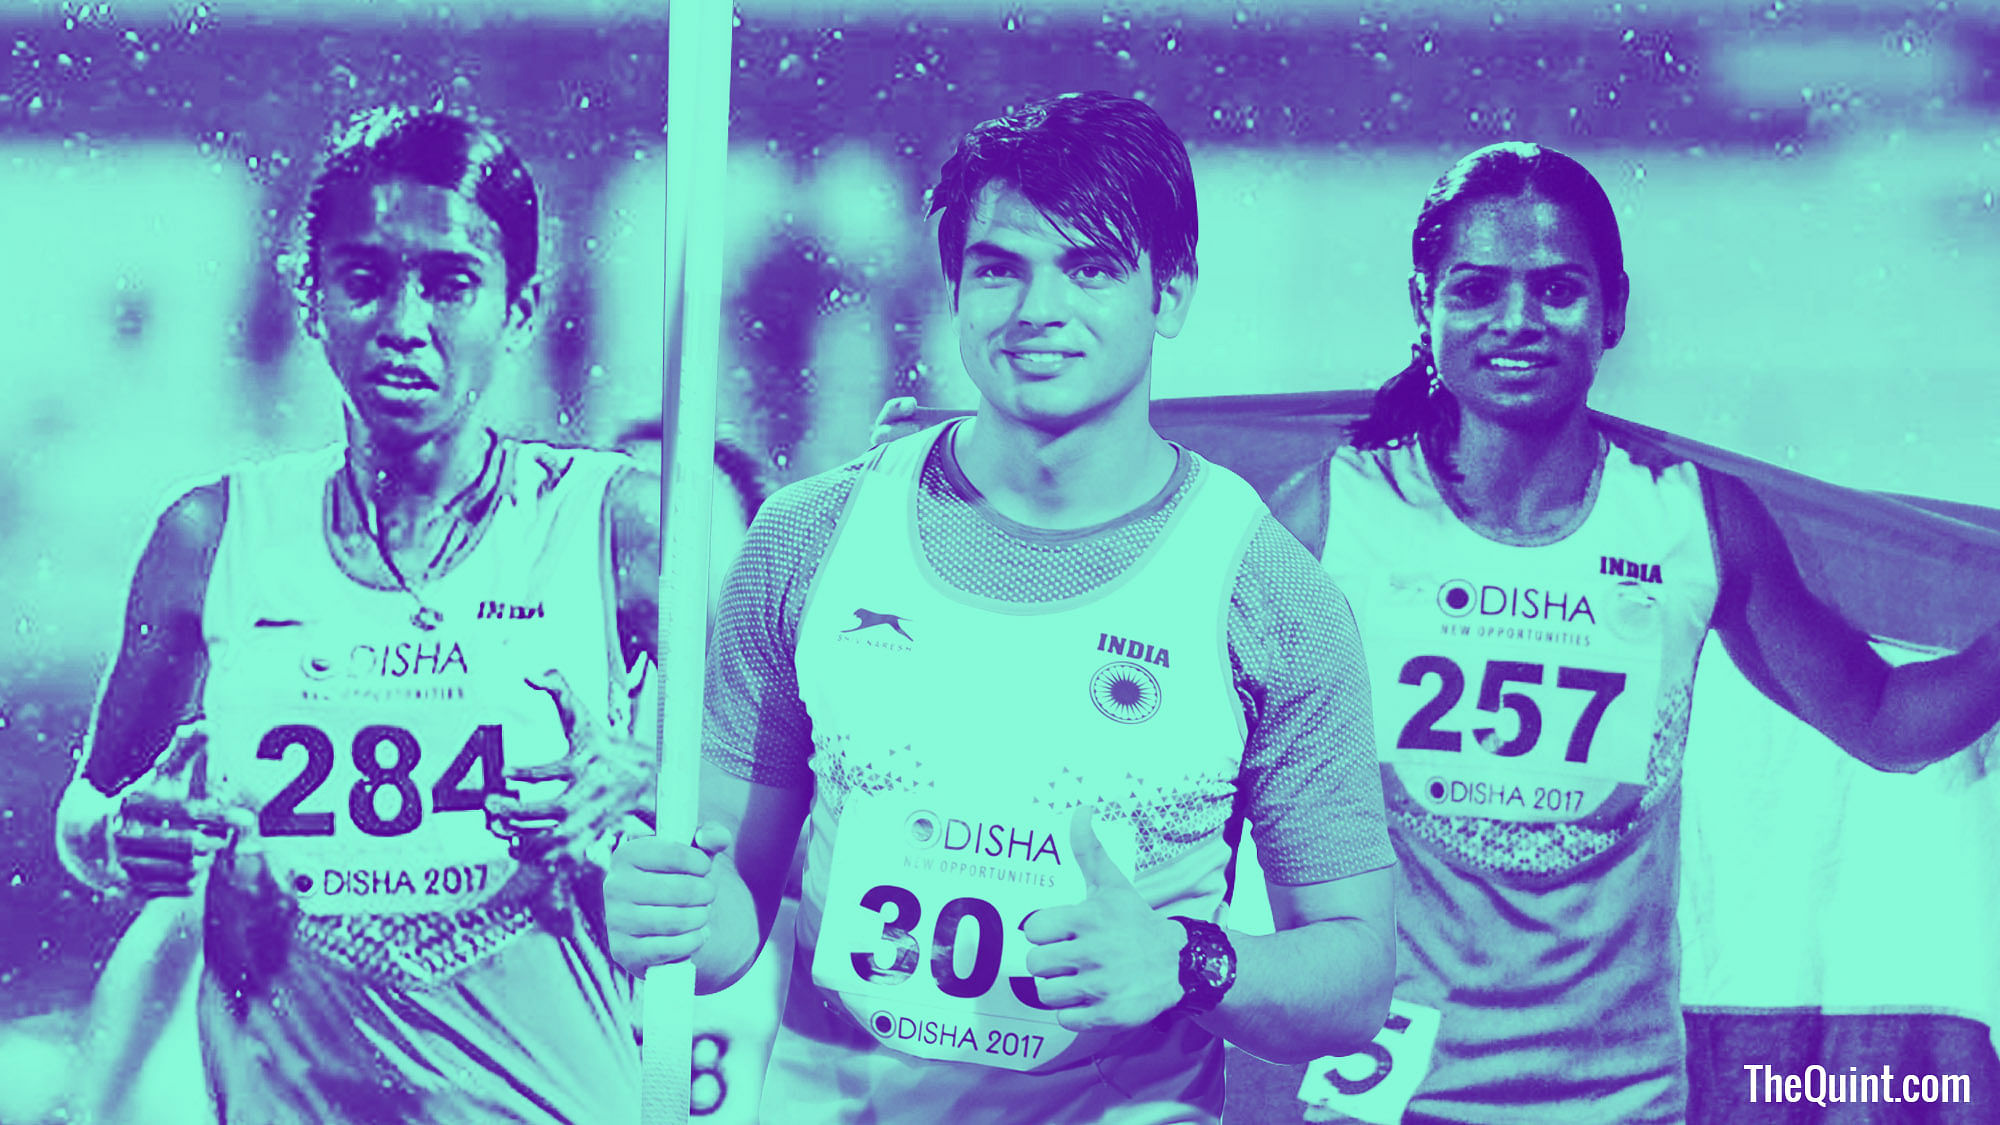 PU Chitra(left) was not allowed to compete in London by the Indian Athletics Federation. Neeraj Chopra (centre) is India’s best bet for a medal. Dutee Chand (right) did not qualify for the Games but was an invitee of the IAAF